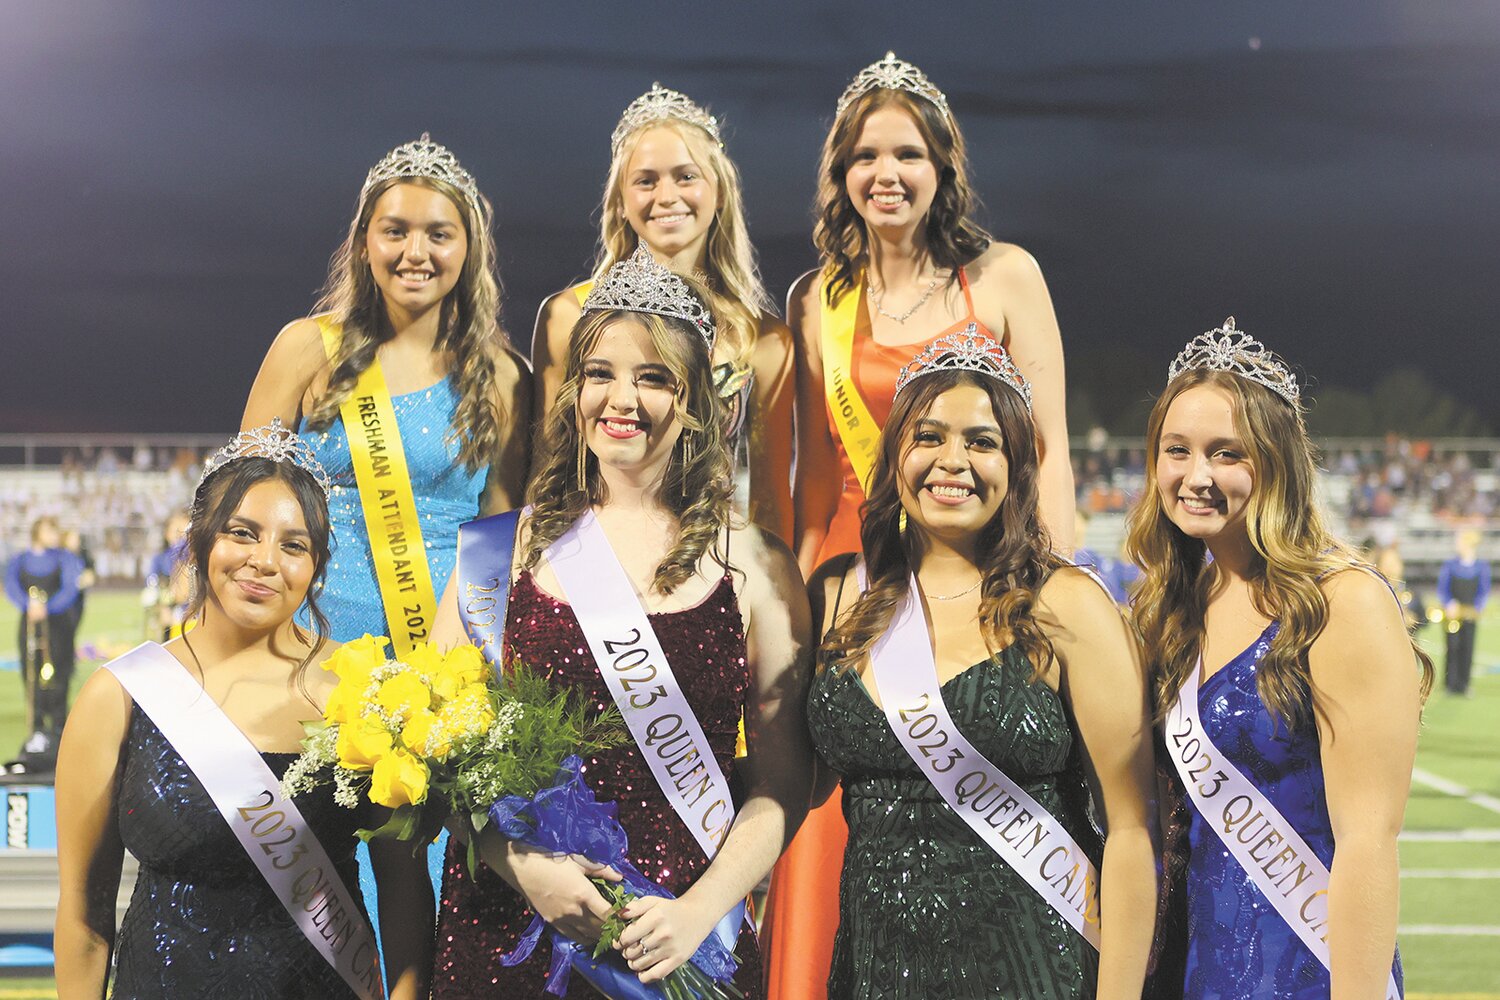 Cimbria Bowling, second from left in the front row, was crowned homecoming queen at Crawfordsville High School on Friday. Also pictured in the front row are senior queen contestants, Yuryko Martinez, Stephany Olvera and Sam Rohr. Pictured in the back row are freshman attendant Dayanara Fernandez, sophomore attendant Alayna Hall and junior attendant Eva McCandless.